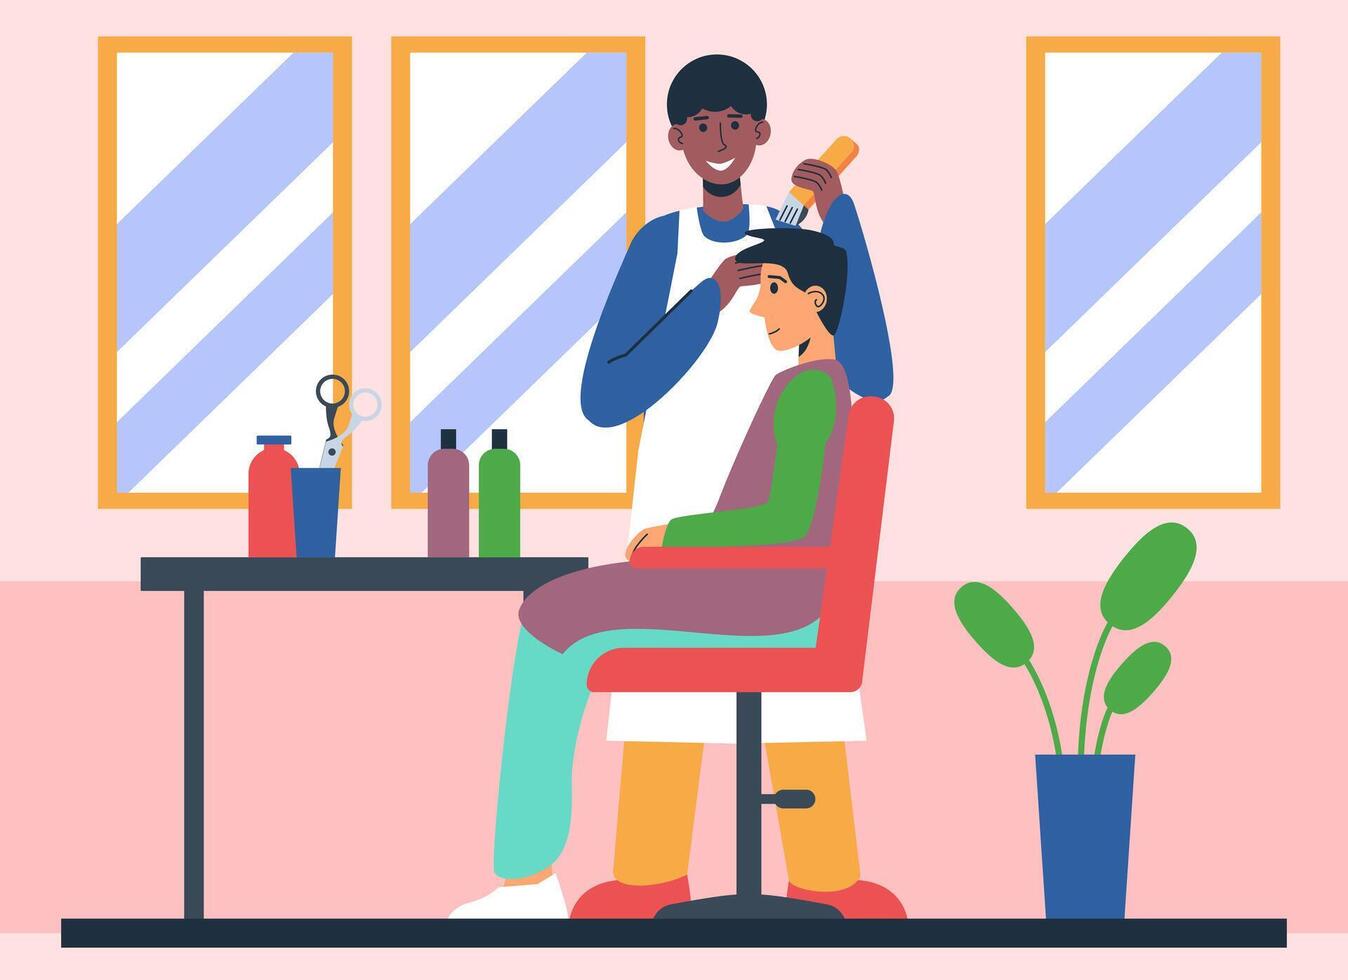 Barber holding clipper and doing hairstyle to man. Hairdressers cut hair for visitors vector